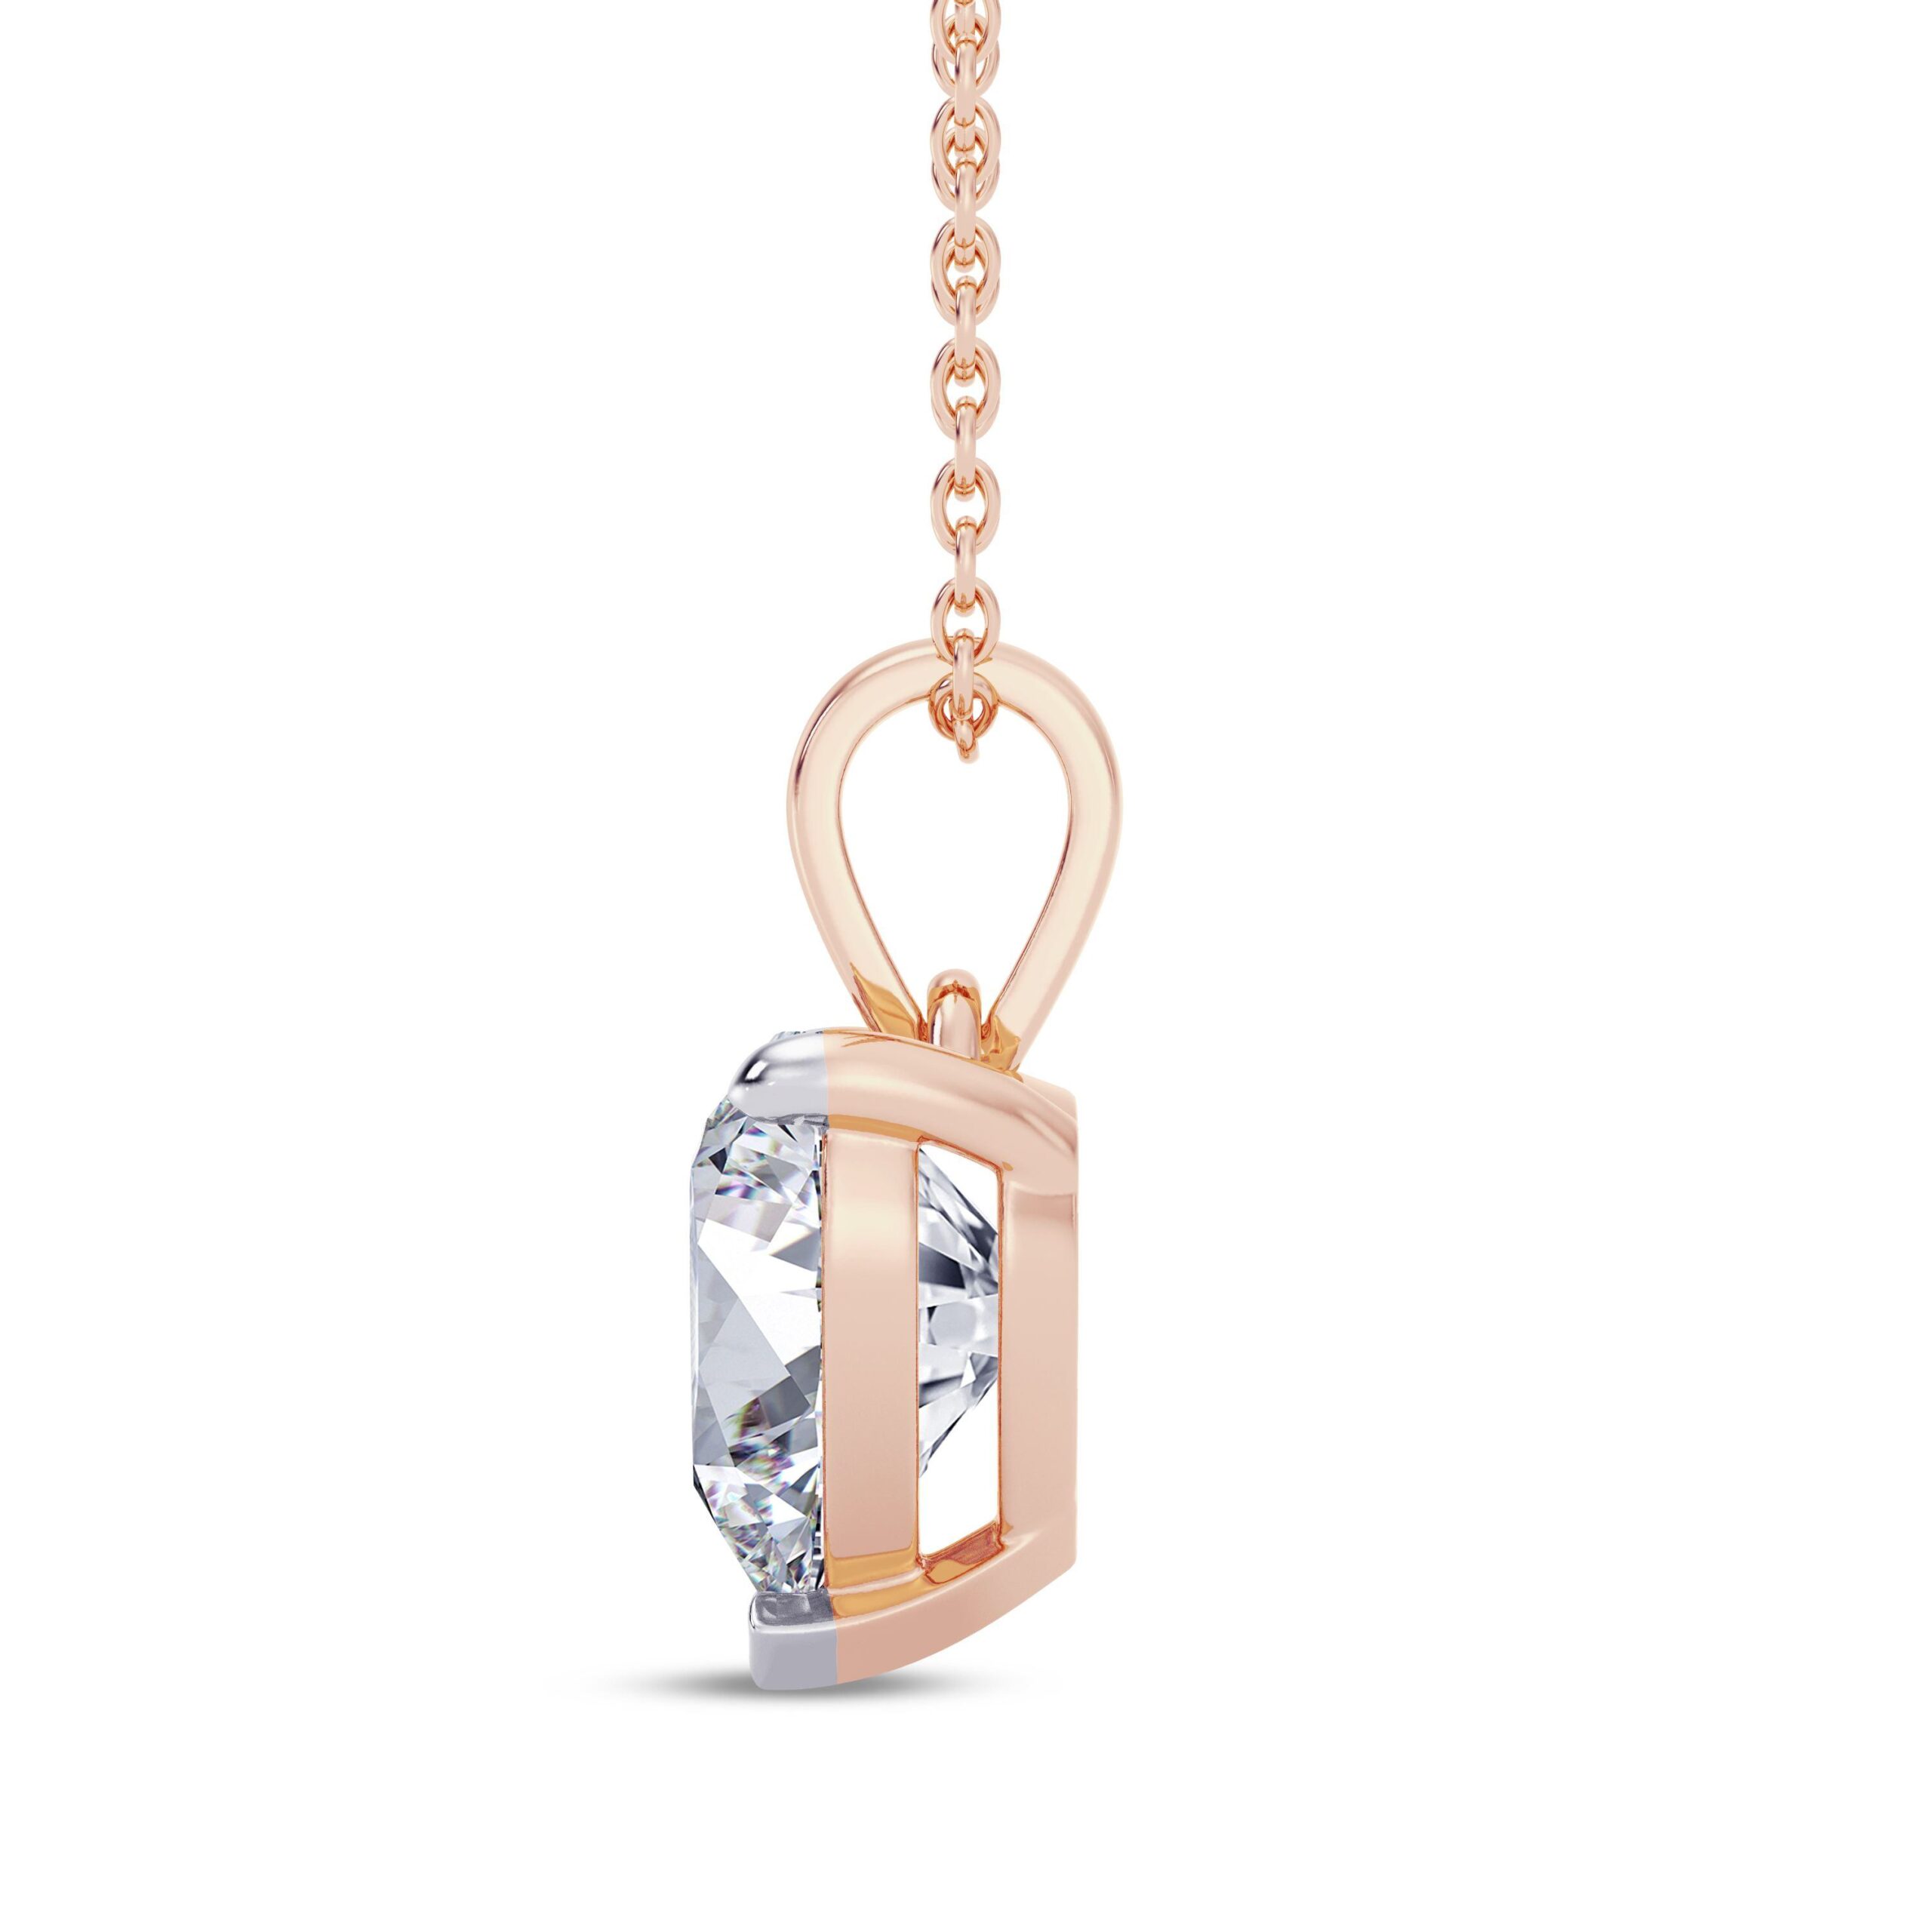 Stuller Three-Stone Pendant 85982:6010:P 14KY - Necklaces | Waddington  Jewelers | Bowling Green, OH